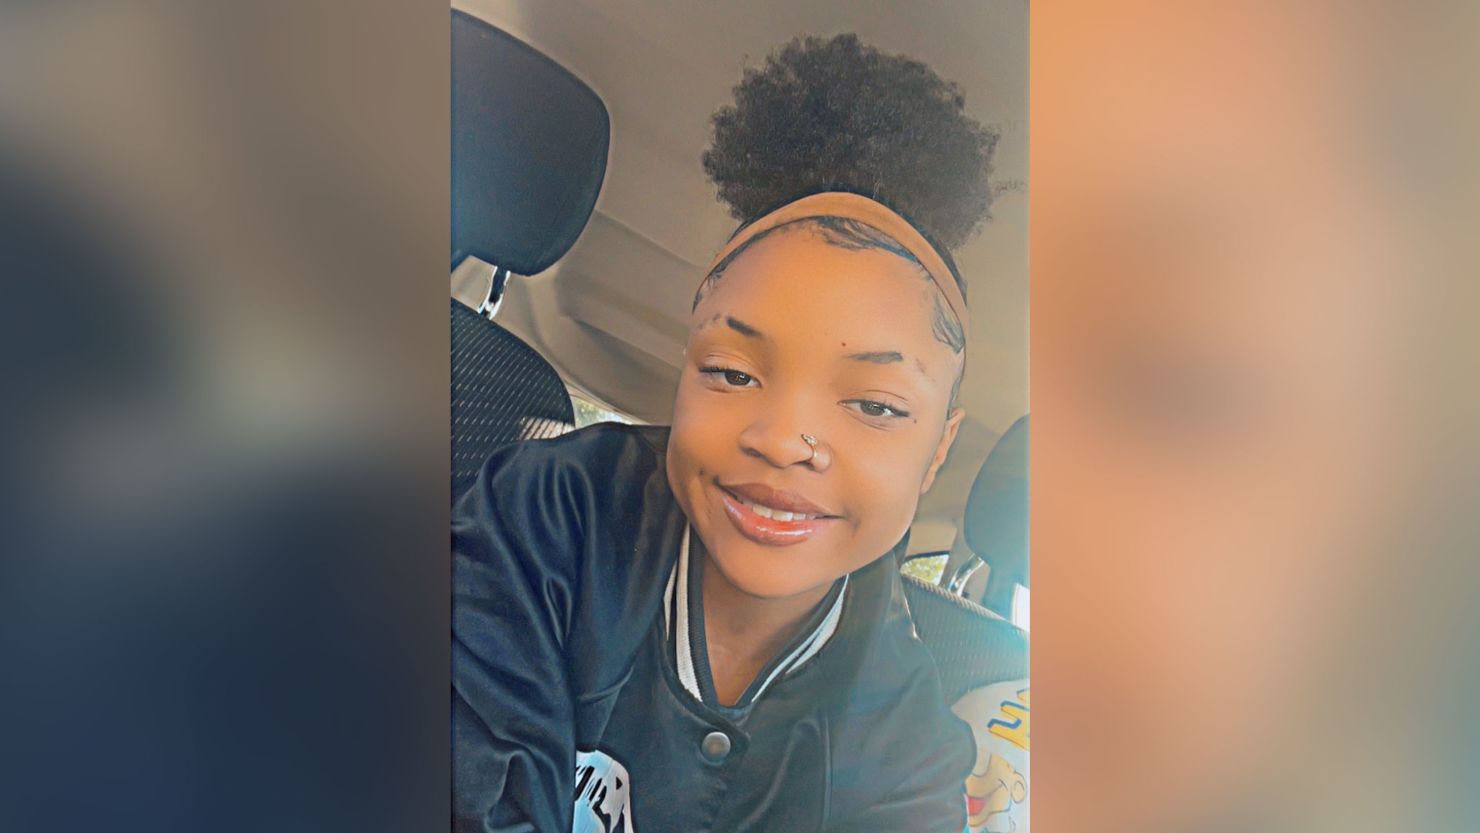 Police in Houston have issued an Amber Alert for 12-year-old E’minie Hughes who has been missing since February 22.